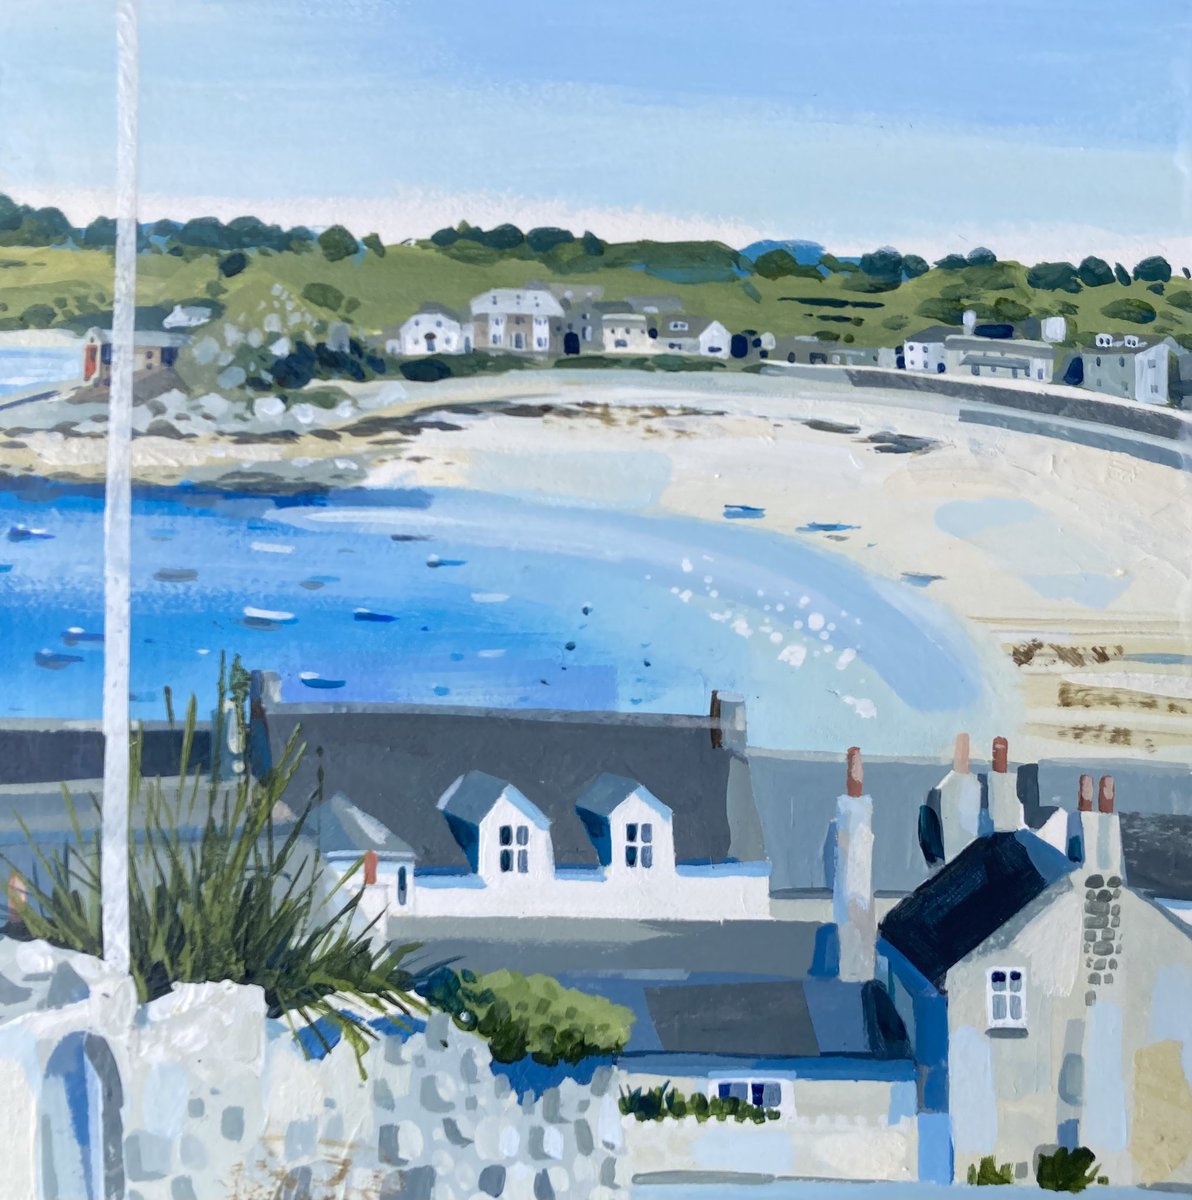 A couple of paintings are en route to @TamariskScilly. This the view down to the harbour in Hugh Town, St Mary's. I'm off there in person next week need the space in my luggage for all the necessary pants and socks. 😁